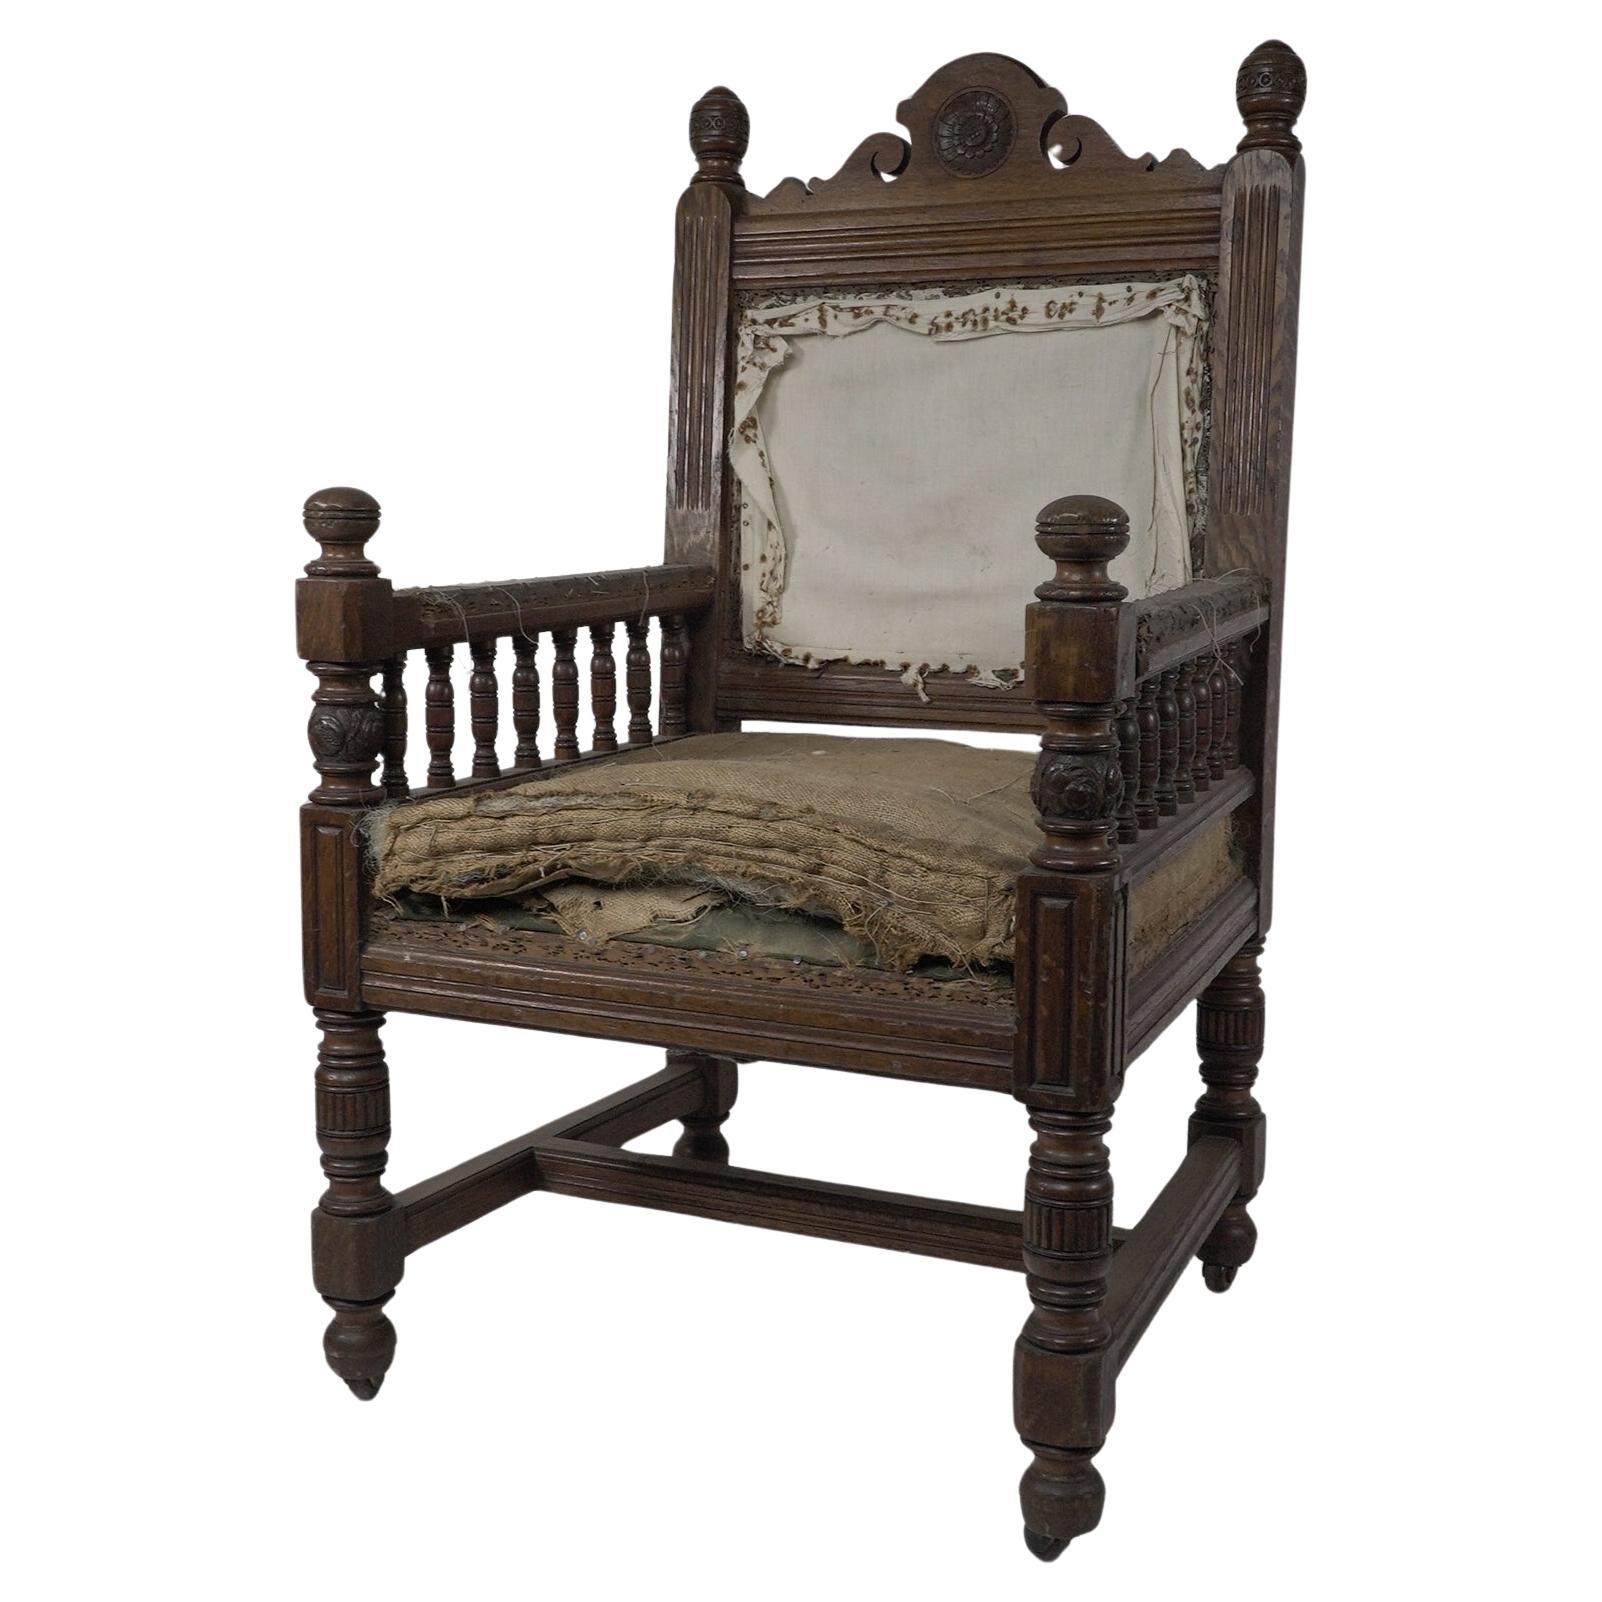 Bruce Talbert attributed probably made by Gillows. A Gothic Revival oak armchair